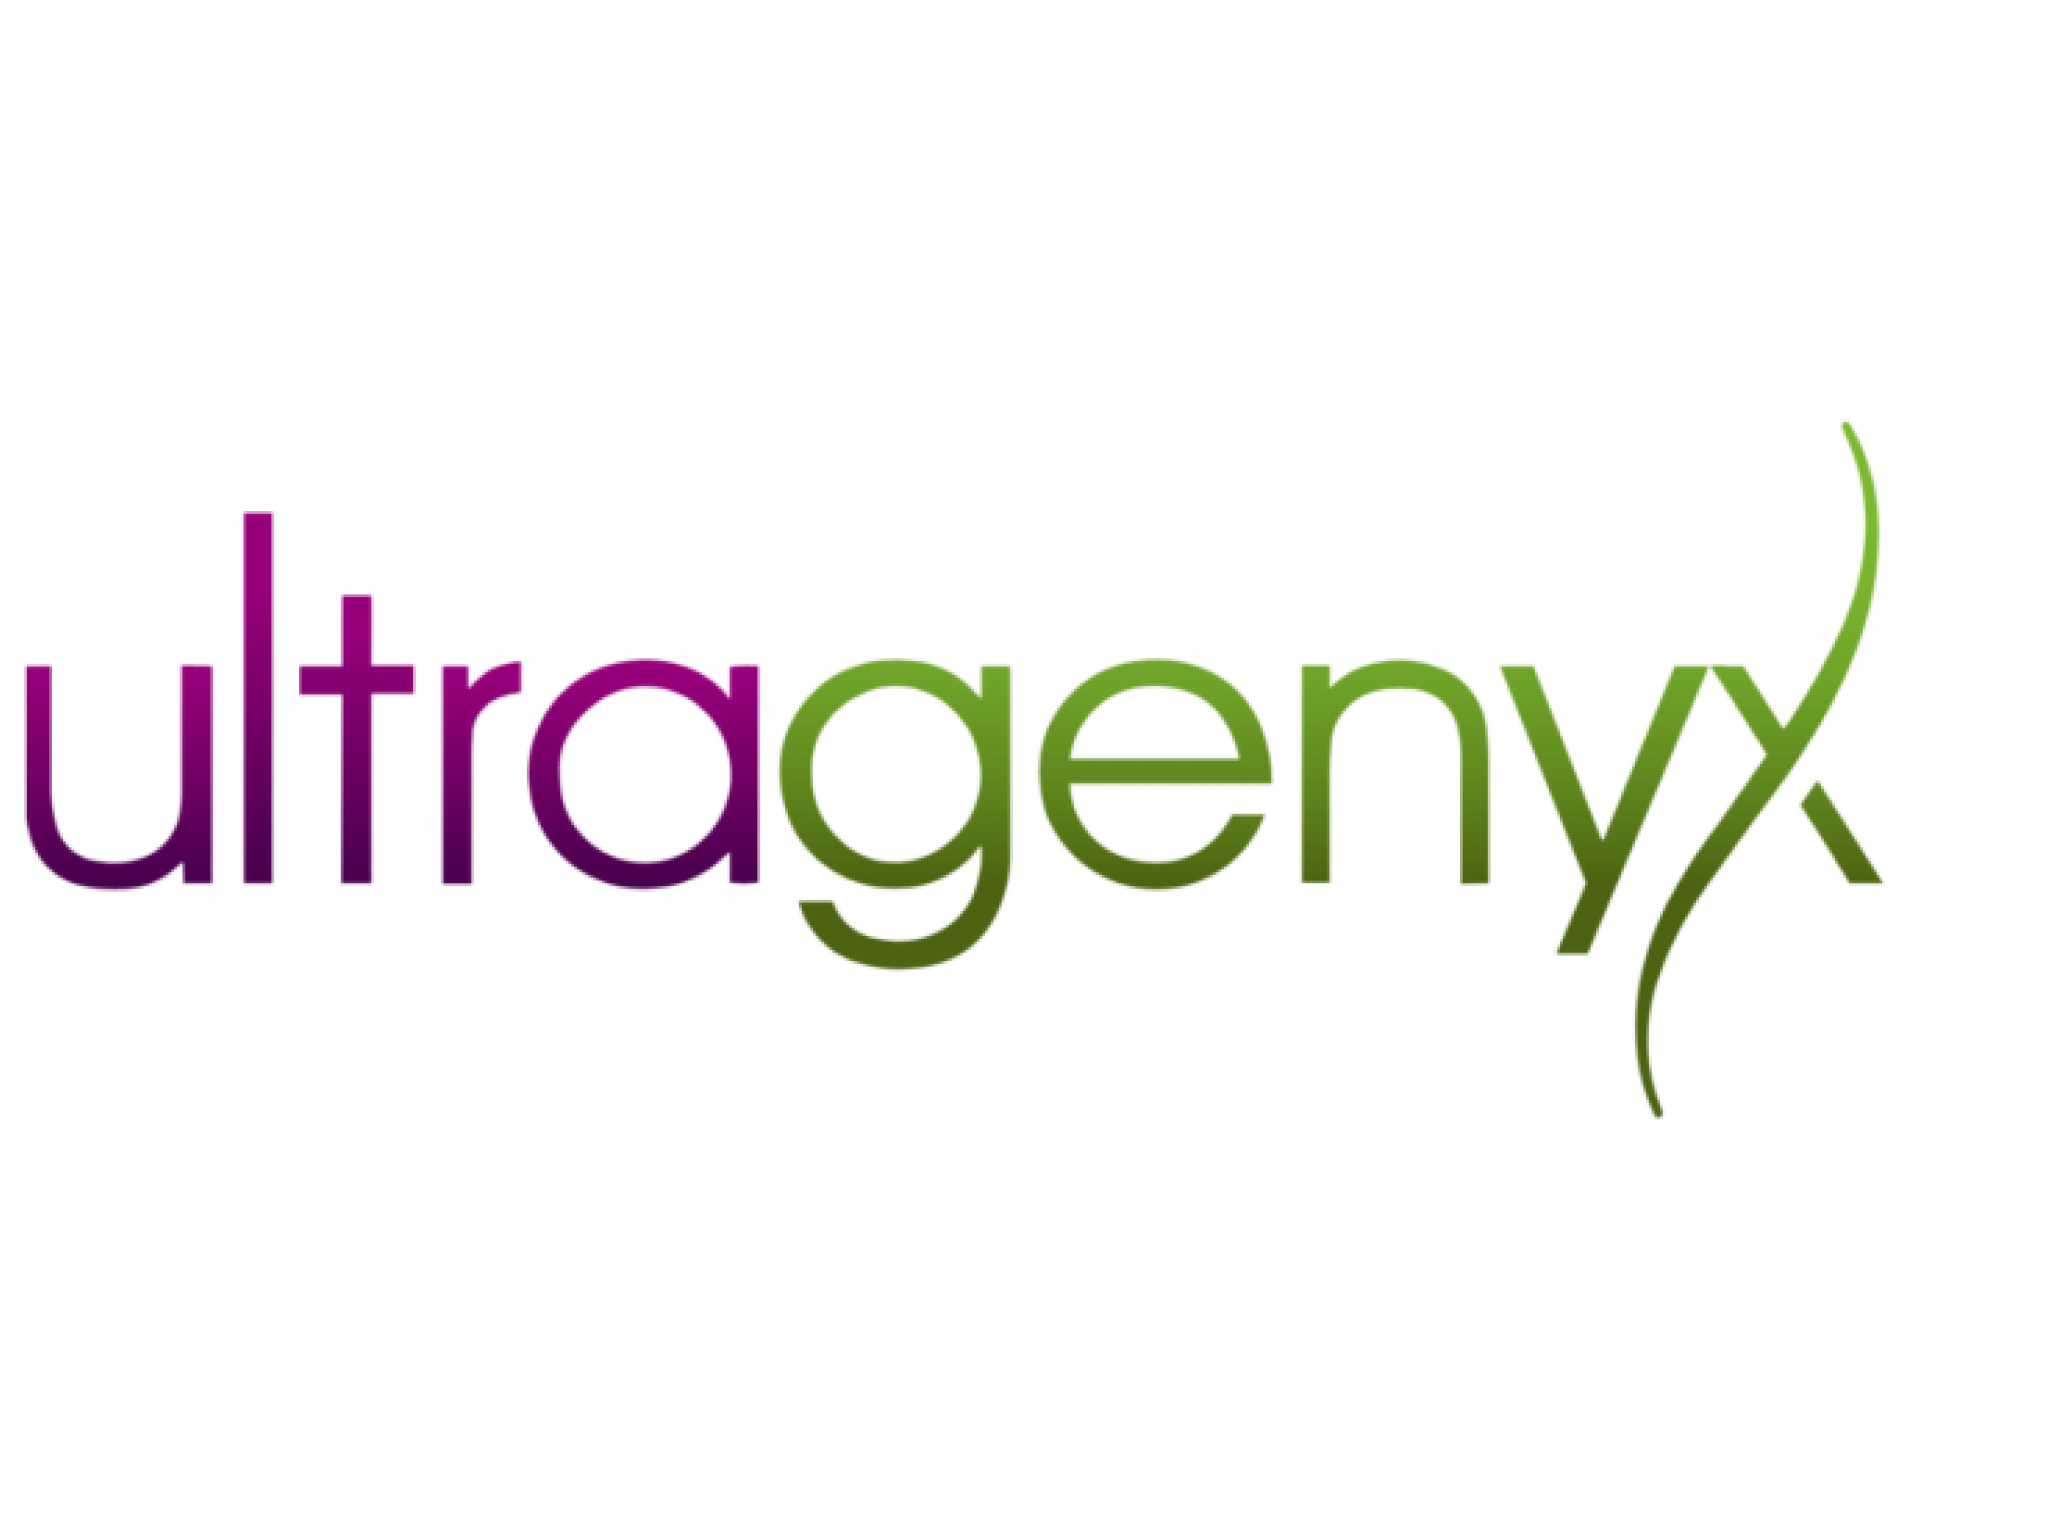 Rare Disease-Focused-Ultragenyx Pharmaceutical Stock Falls On Serious Adverse Events In Eaarly Genetic Disorder Study